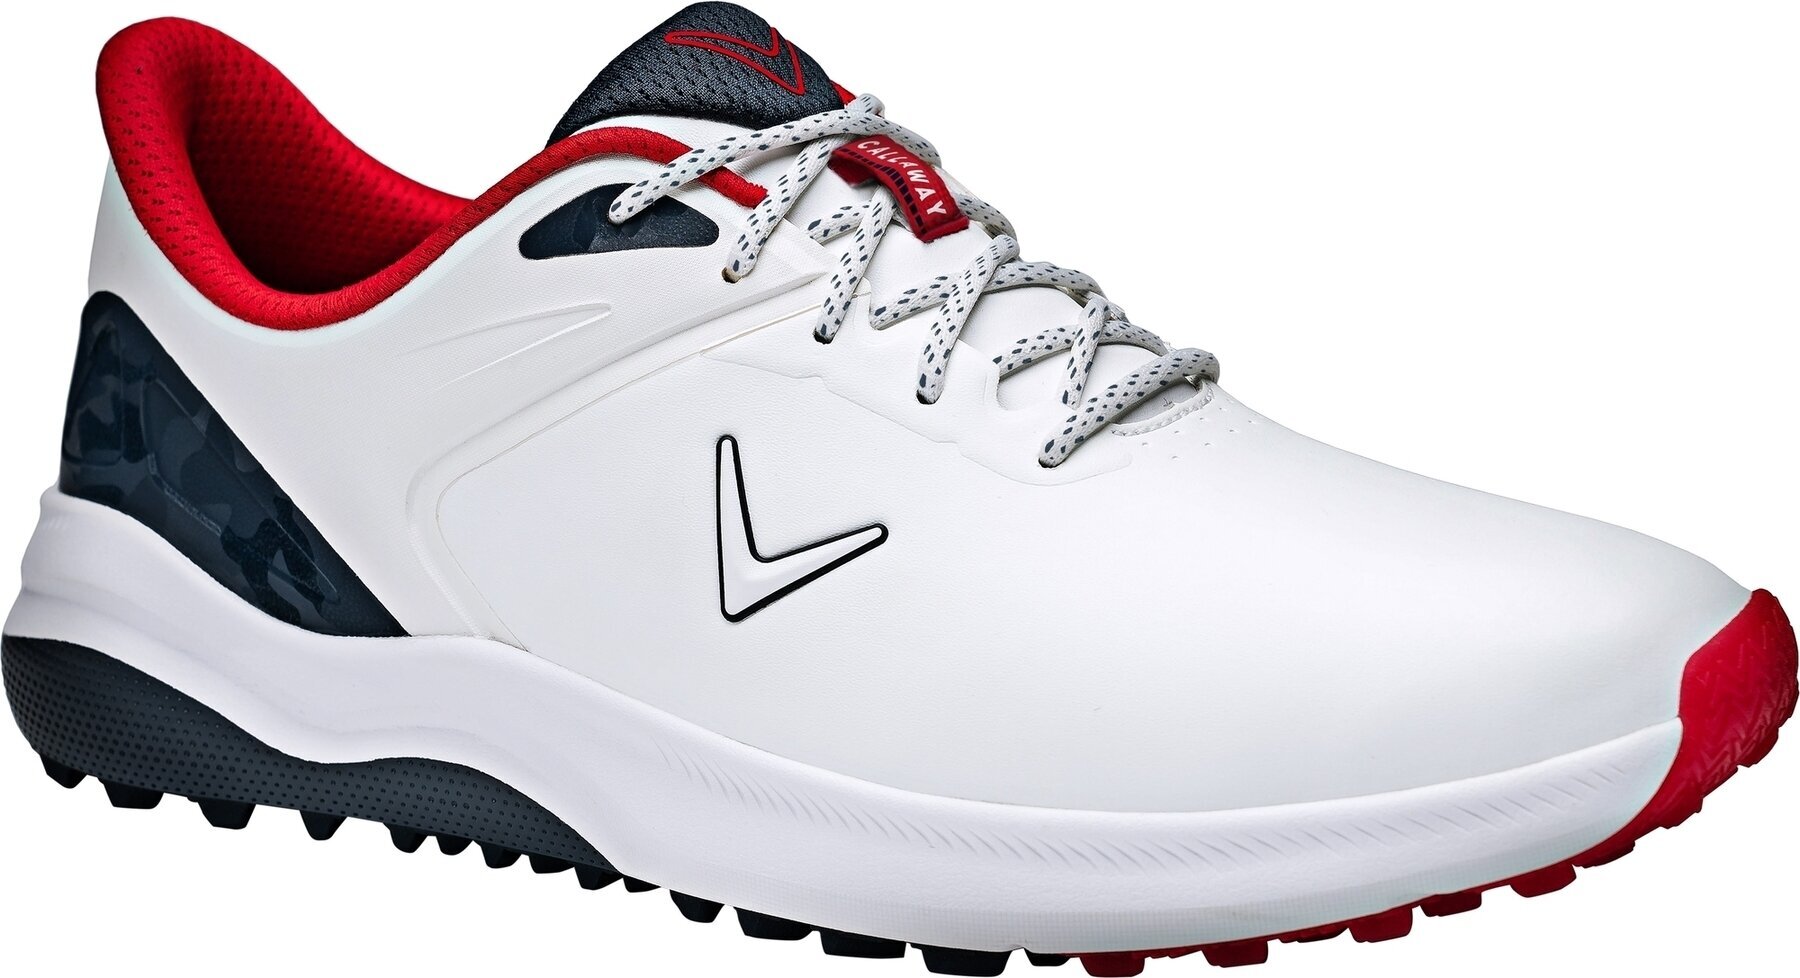 Chaussures de golf pour hommes Callaway Lazer Mens Golf Shoes White/Navy/Red 40